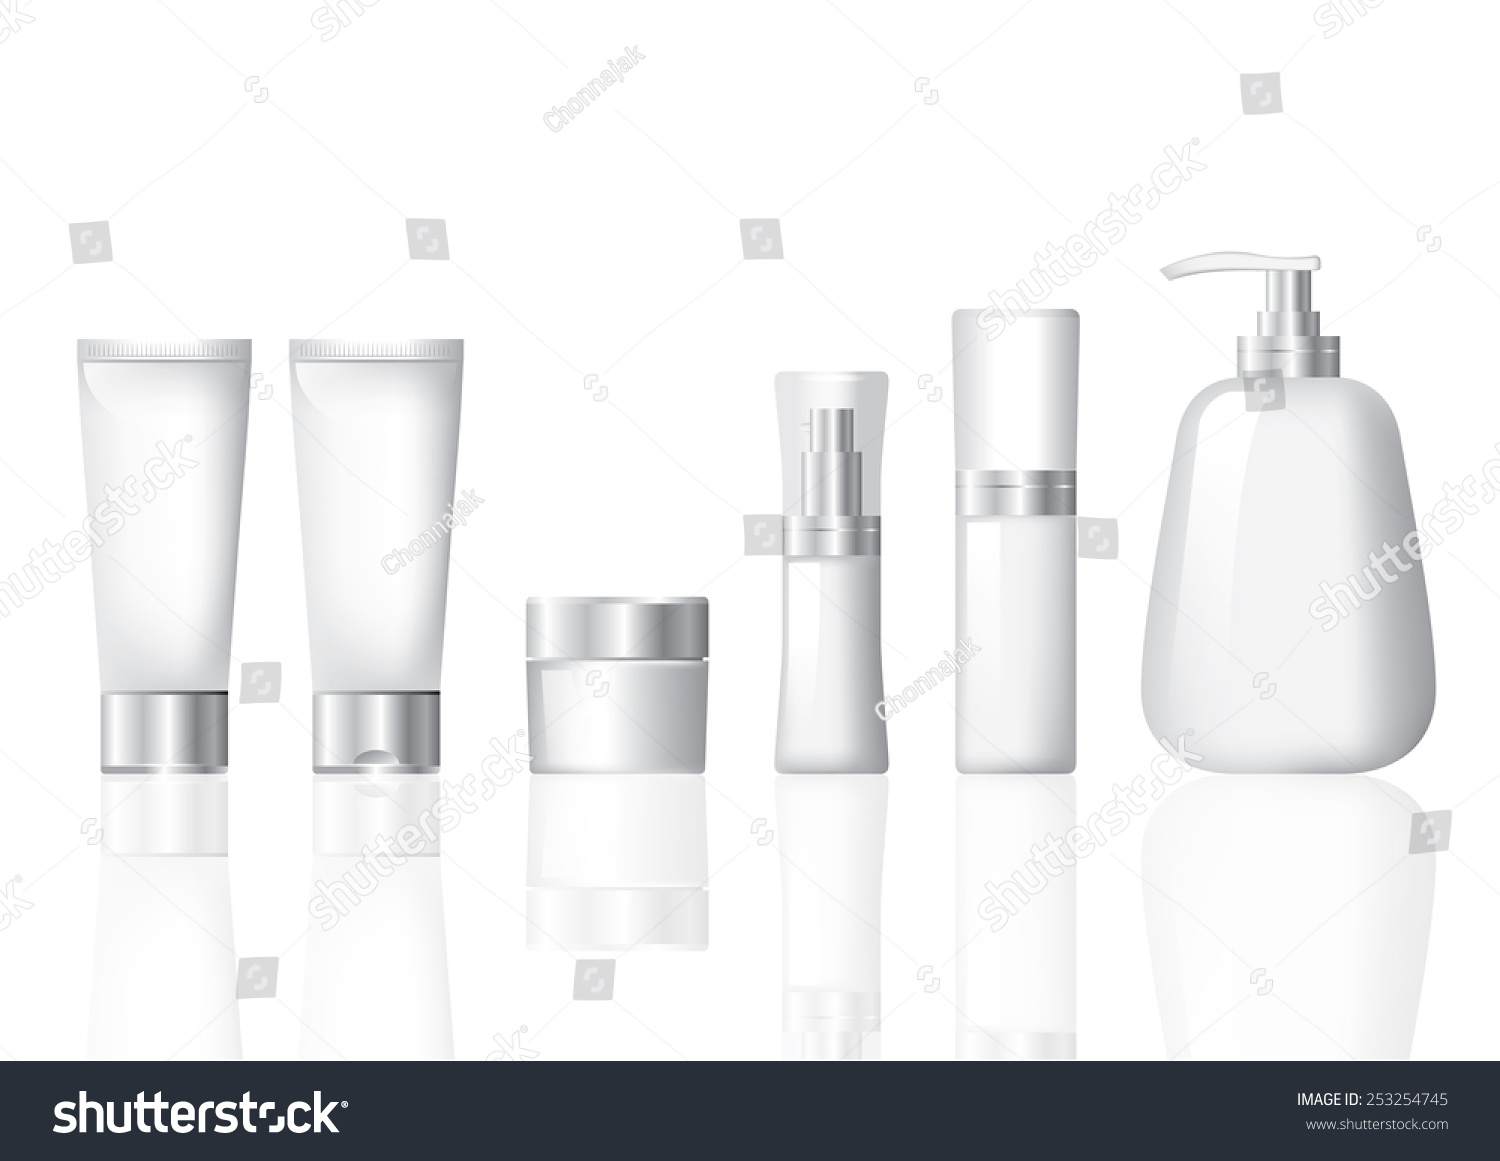 tumbler mockup free Silver White Cosmetic Set Mockup Package Vector Stock